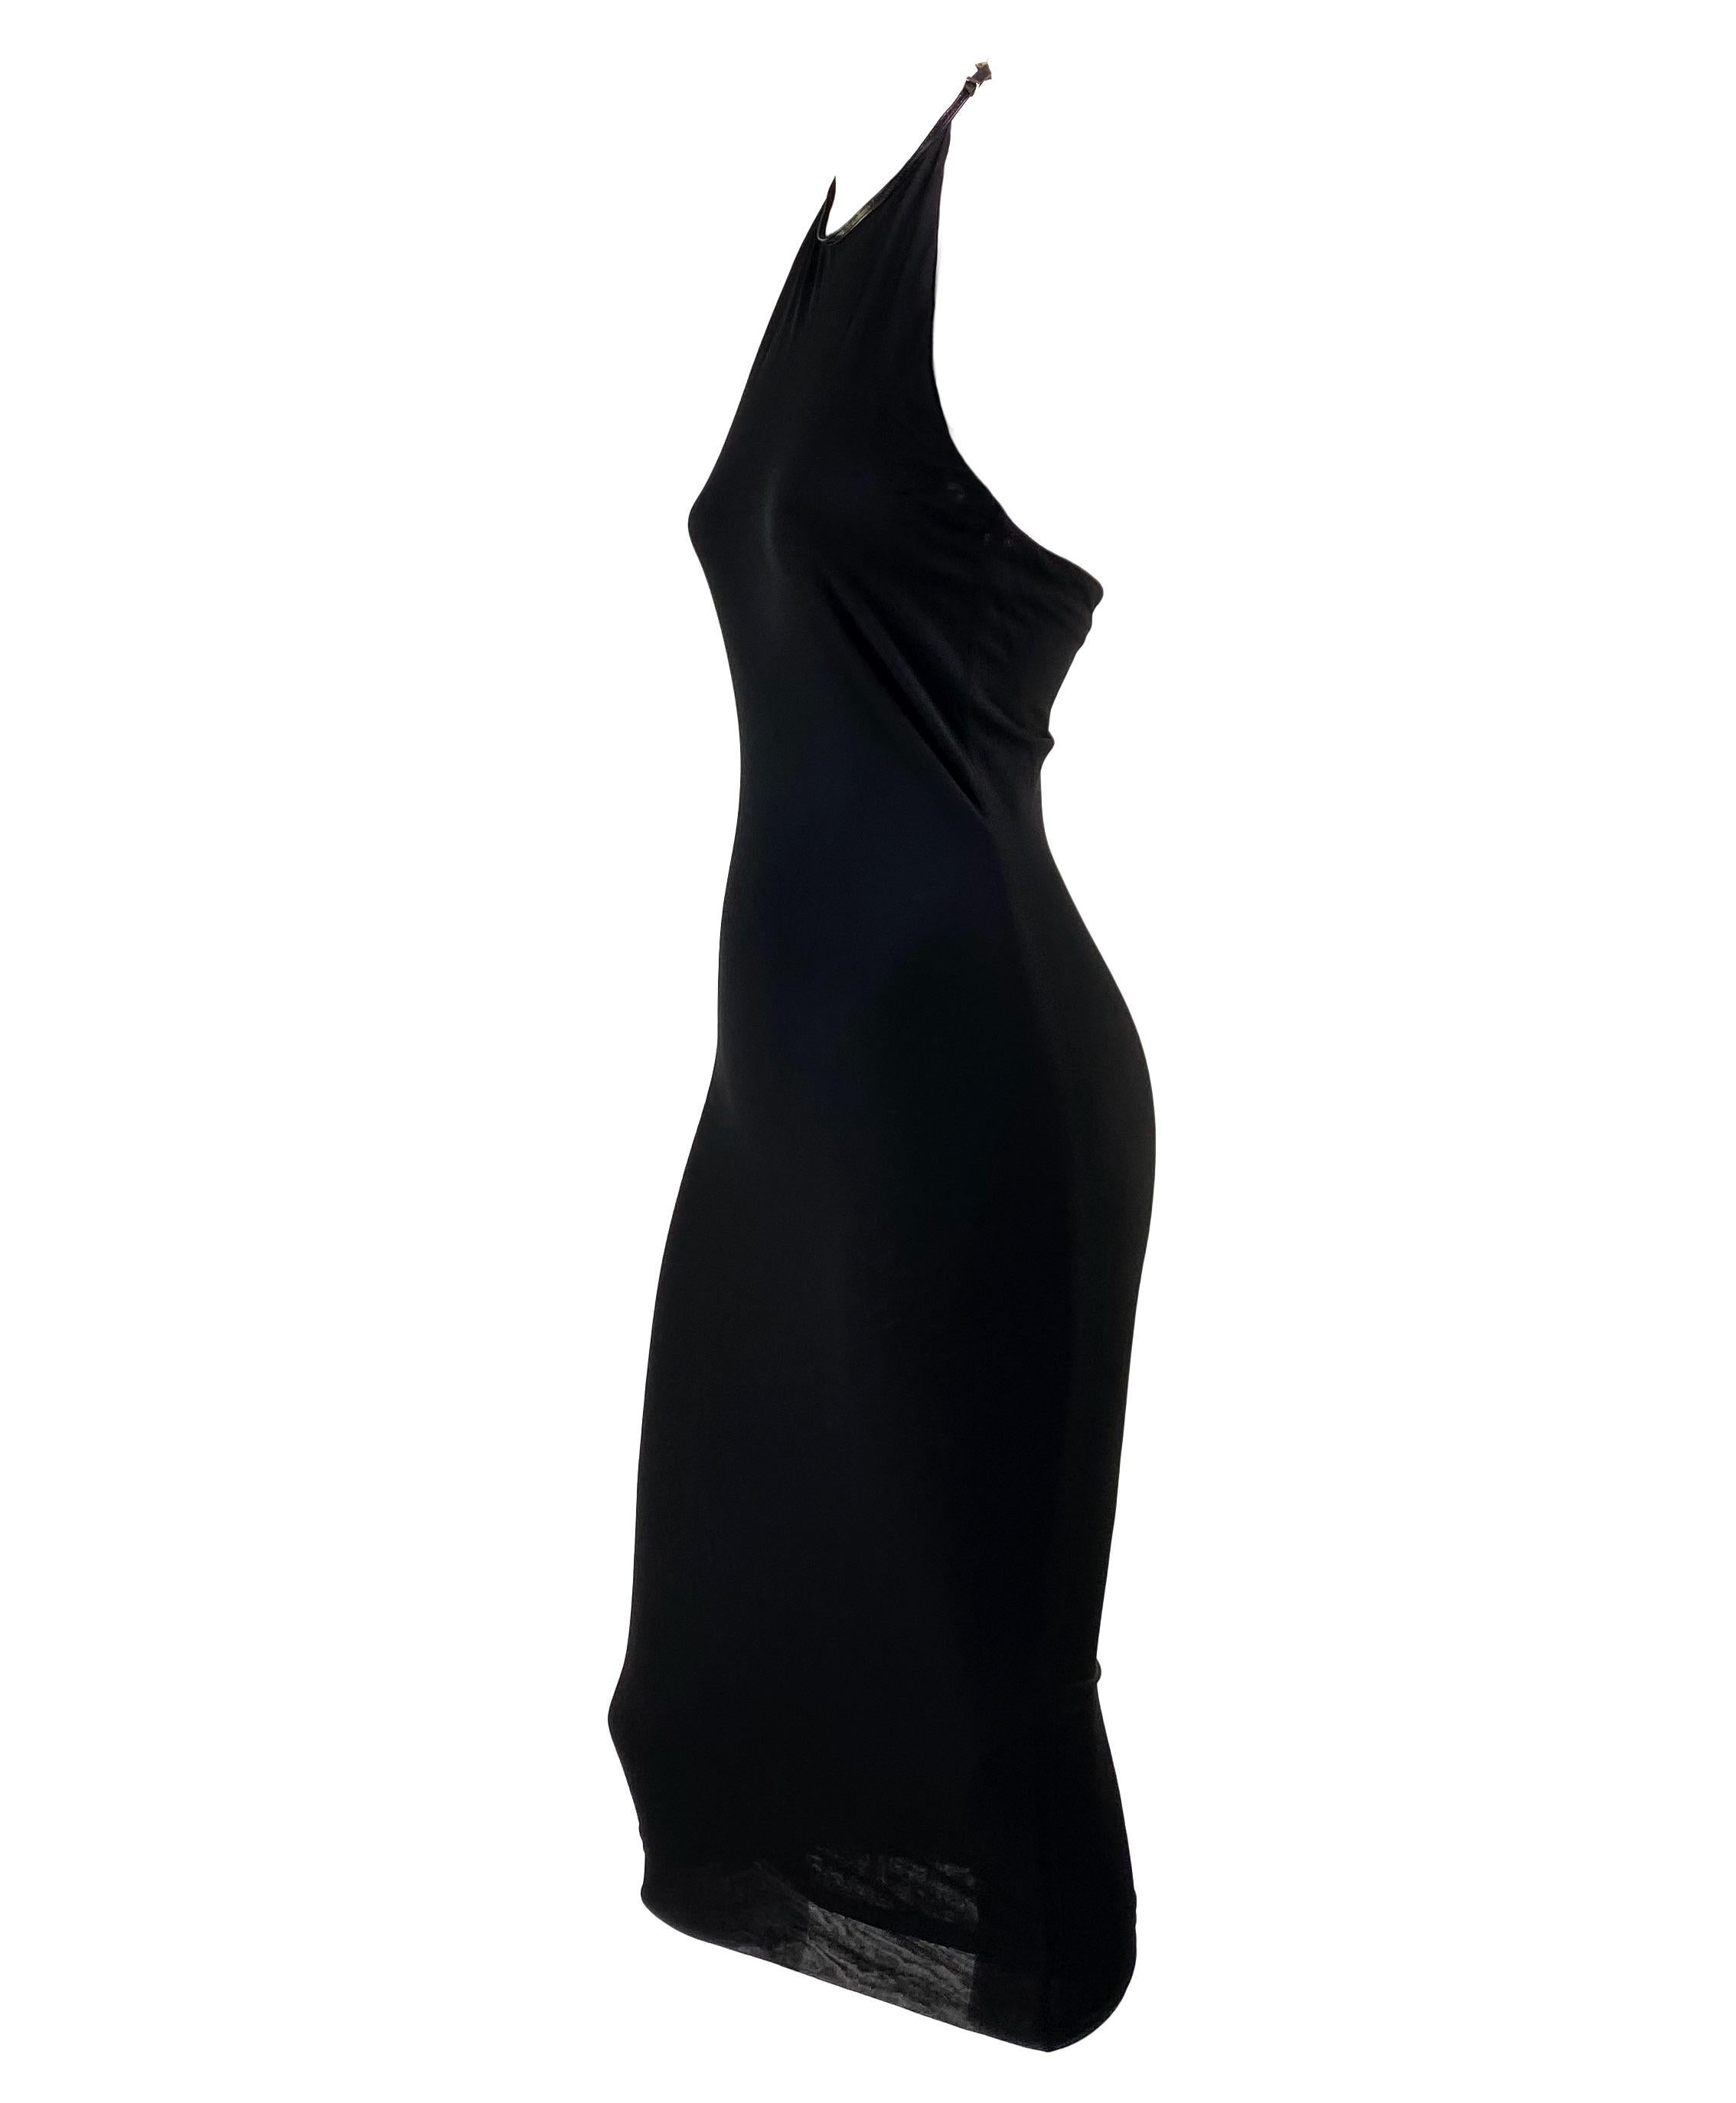 S/S 1998 Gucci by Tom Ford G Buckle Runway Halter Neck Black Stretch Dress In Good Condition For Sale In West Hollywood, CA